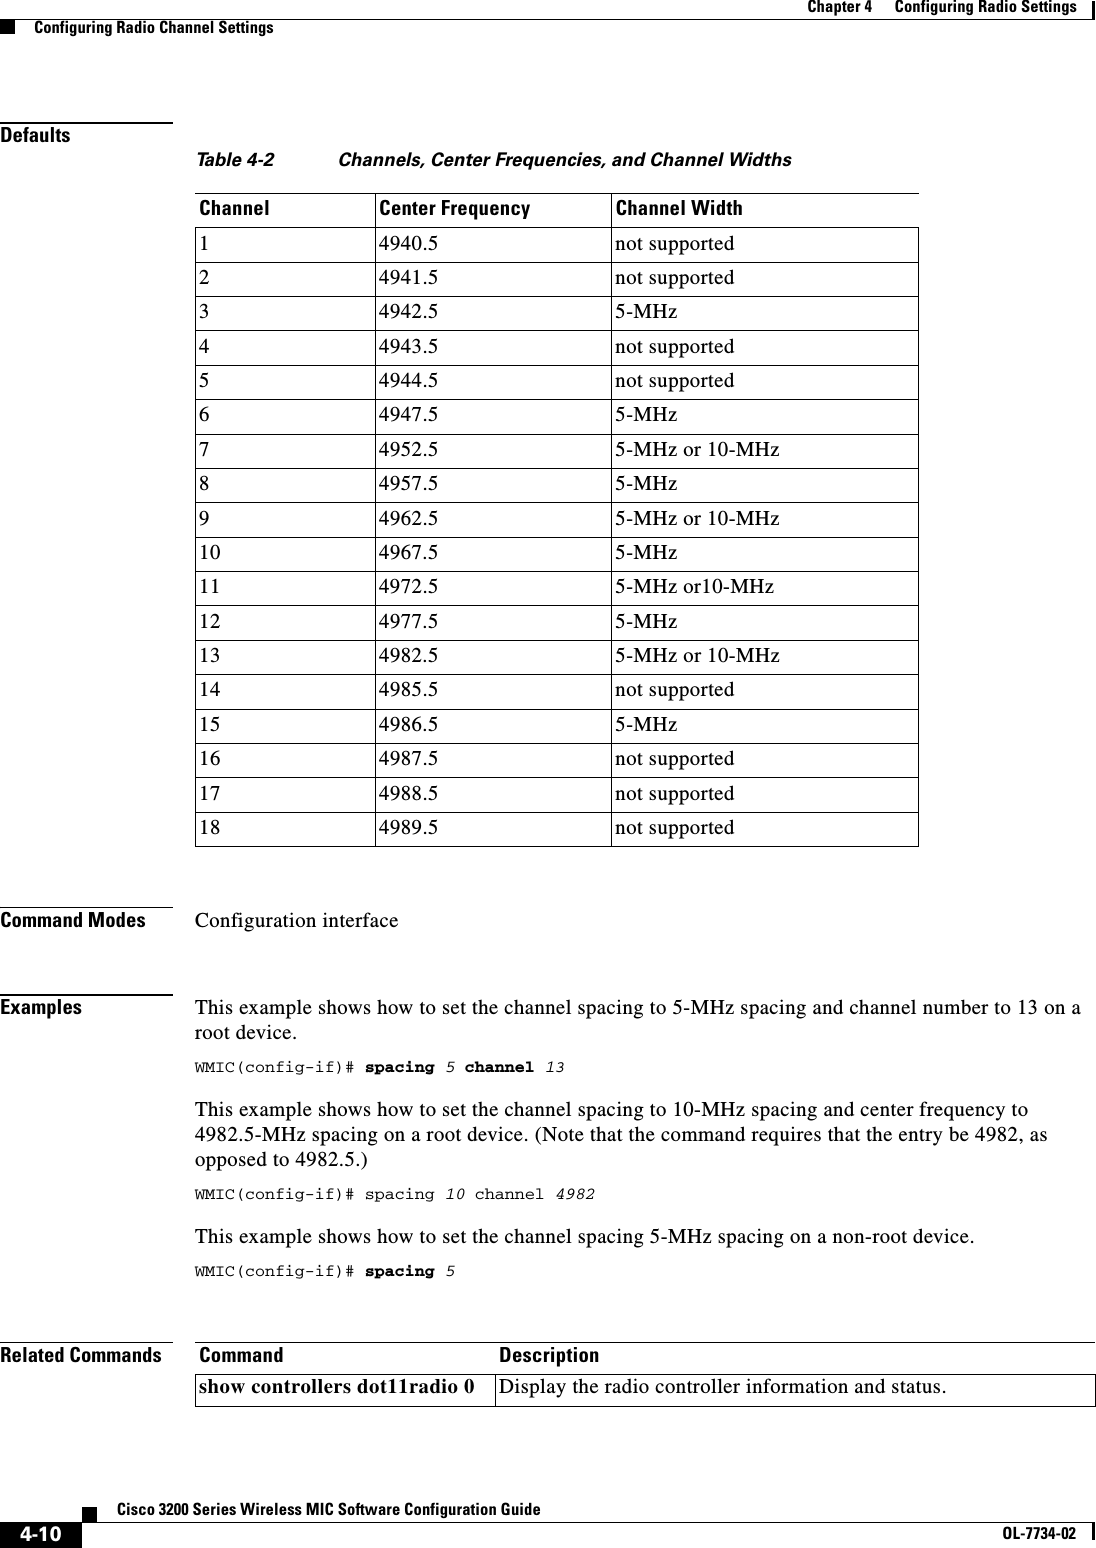 4-10Cisco 3200 Series Wireless MIC Software Configuration GuideOL-7734-02Chapter 4      Configuring Radio SettingsConfiguring Radio Channel SettingsDefaultsCommand Modes Configuration interface ExamplesThis example shows how to set the channel spacing to 5-MHz spacing and channel number to 13 on a root device.WMIC(config-if)# spacing5channel 13This example shows how to set the channel spacing to 10-MHz spacing and center frequency to 4982.5-MHz spacing on a root device. (Note that the command requires that the entry be 4982, as opposed to 4982.5.)WMIC(config-if)# spacing 10 channel 4982This example shows how to set the channel spacing 5-MHz spacing on a non-root device.WMIC(config-if)# spacing 5Related CommandsTable 4-2 Channels, Center Frequencies, and Channel WidthsChannel Center Frequency  Channel Width1 4940.5 not supported2 4941.5 not supported3 4942.5 5-MHz4 4943.5 not supported5 4944.5 not supported6 4947.5 5-MHz7 4952.5 5-MHz or 10-MHz8 4957.5 5-MHz9 4962.5 5-MHz or 10-MHz10 4967.5 5-MHz11 4972.5 5-MHz or10-MHz12 4977.5 5-MHz13 4982.5 5-MHz or 10-MHz14 4985.5 not supported15 4986.5 5-MHz16 4987.5 not supported17 4988.5 not supported18 4989.5 not supportedCommand Descriptionshow controllers dot11radio 0 Display the radio controller information and status.